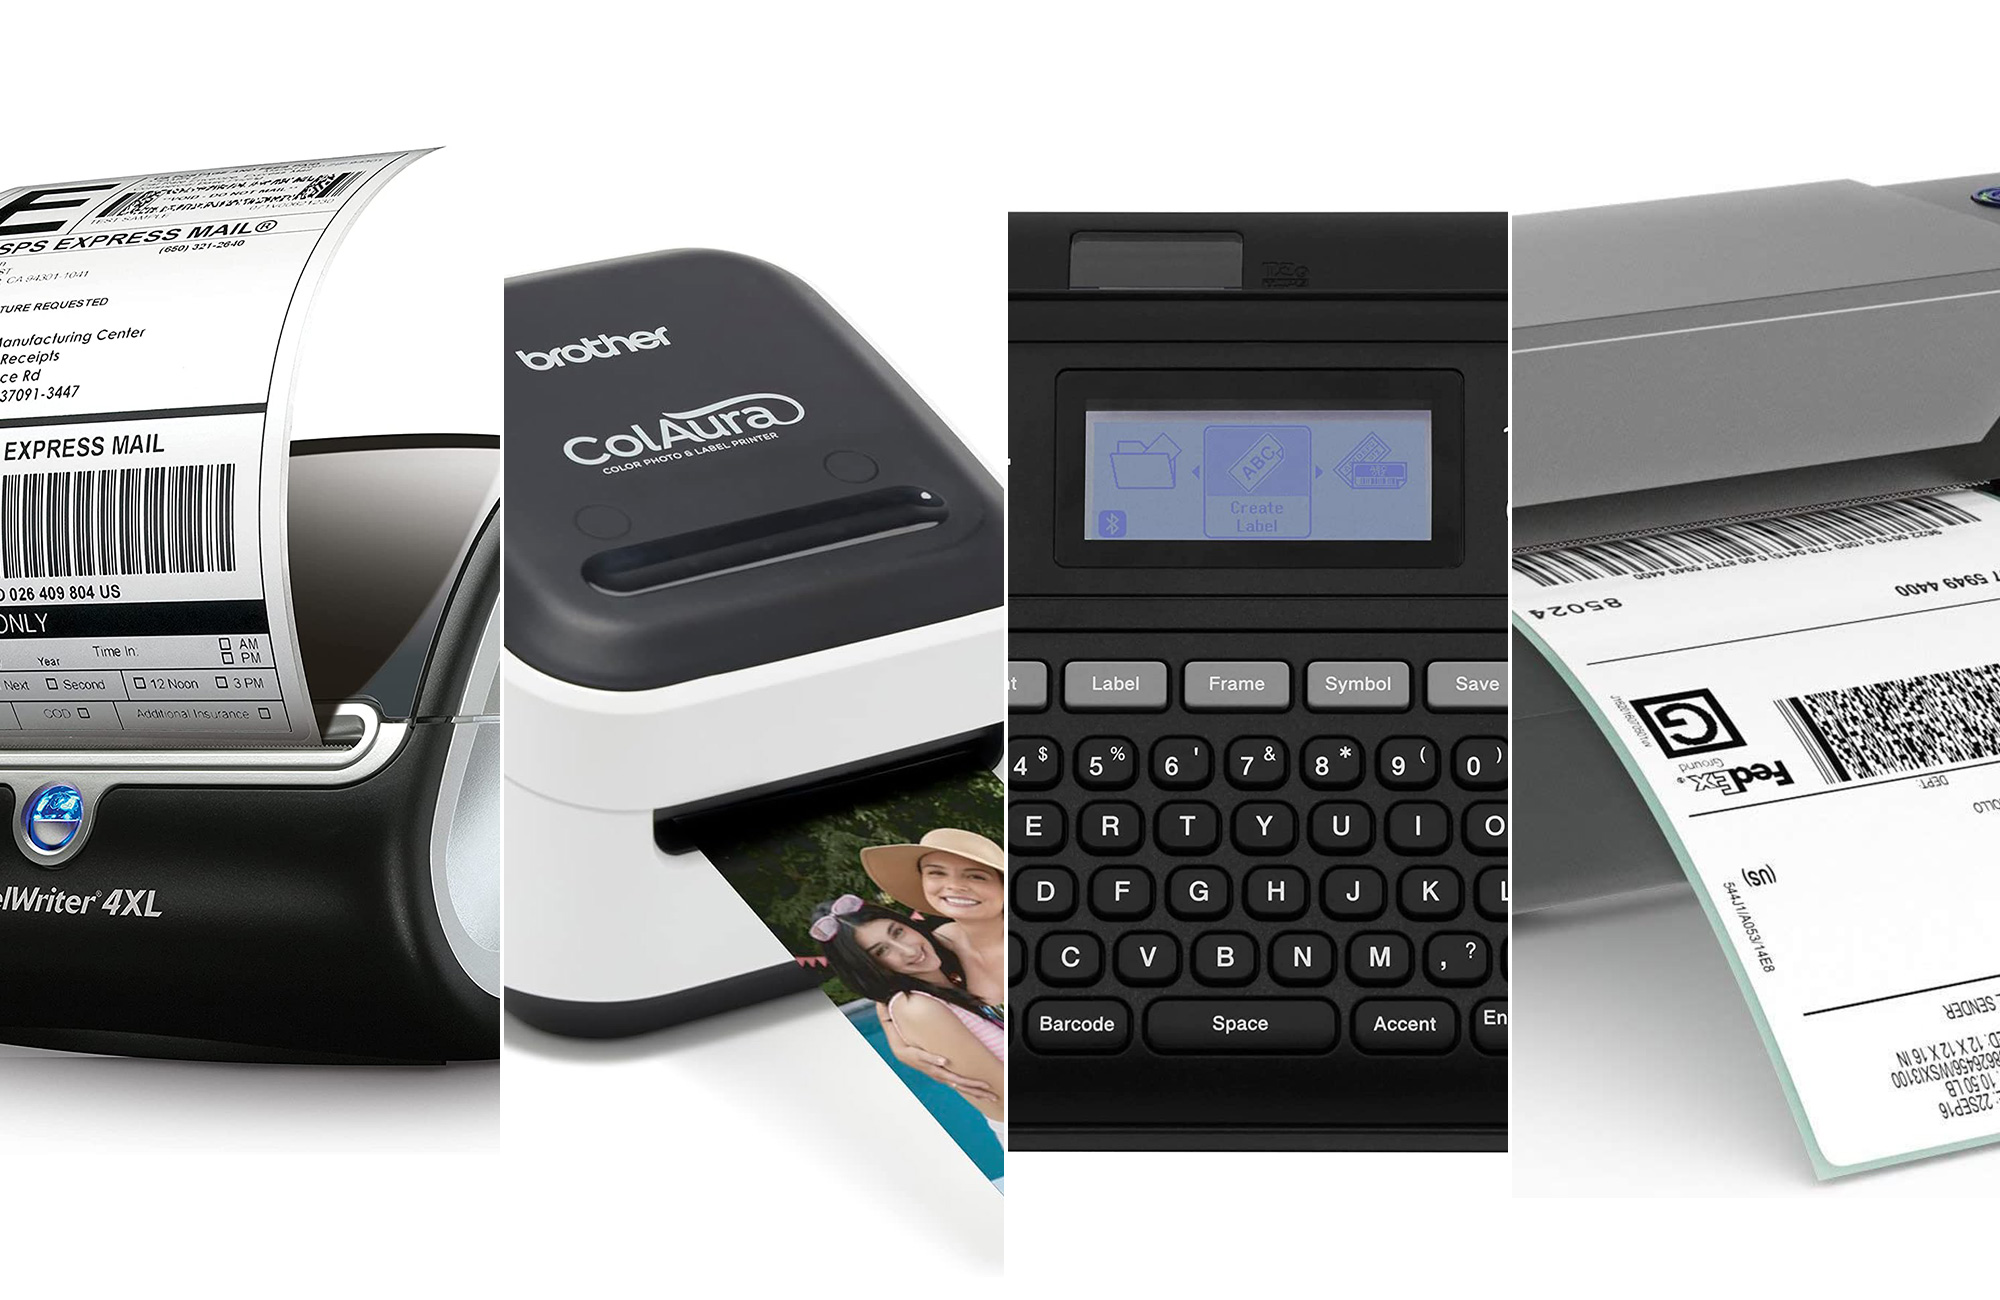 The best label printers composited